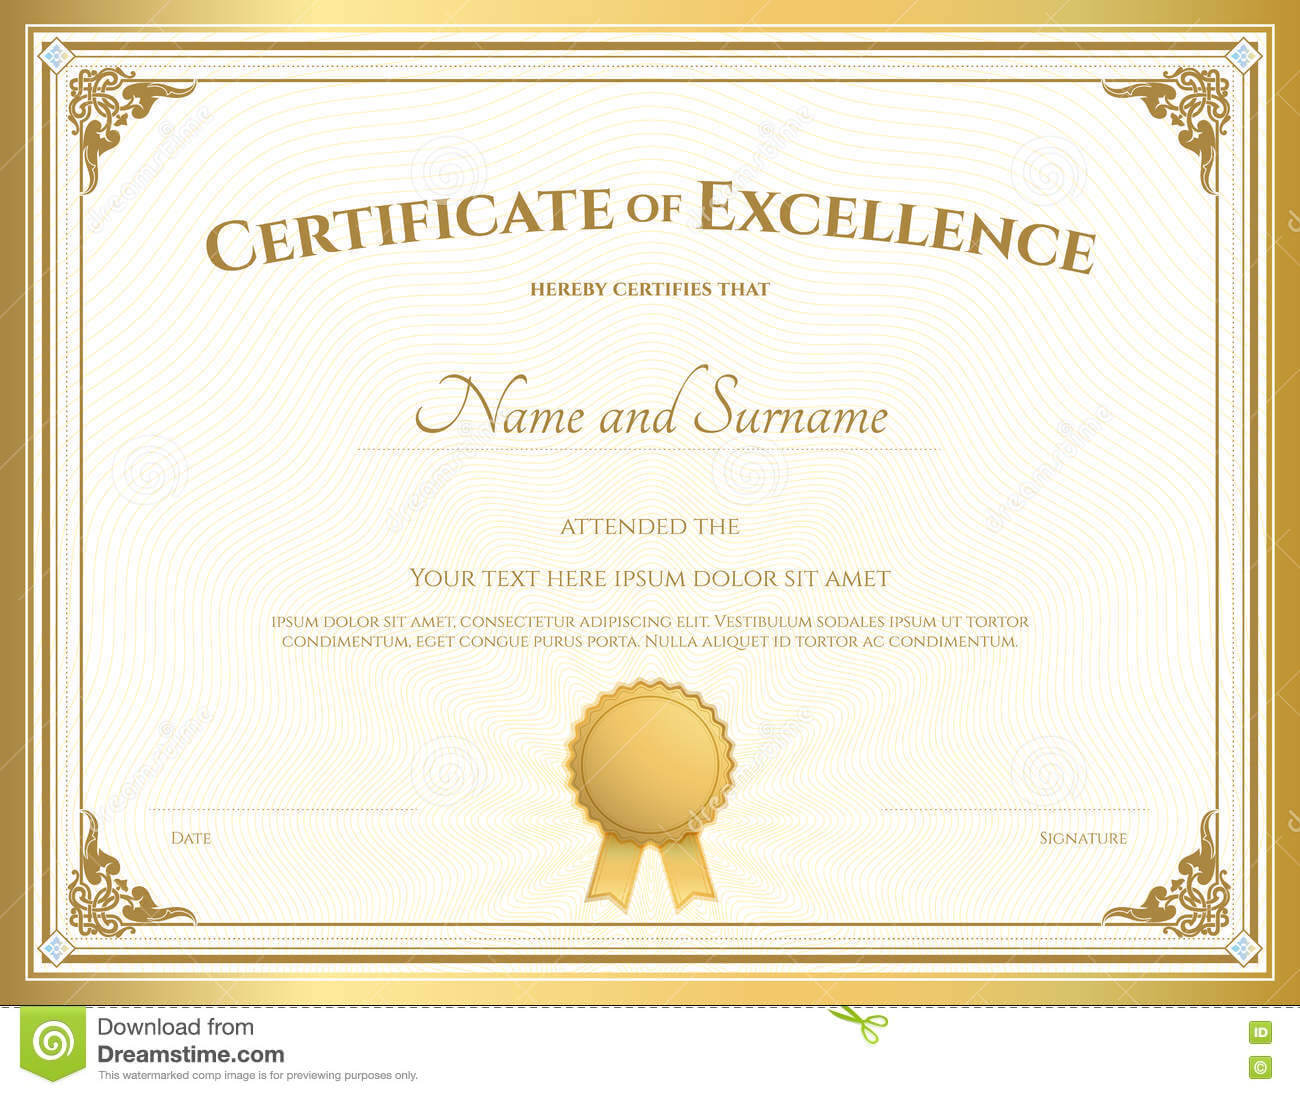 Certificate Of Excellence Template With Gold Border Stock Pertaining To Free Certificate Of Excellence Template